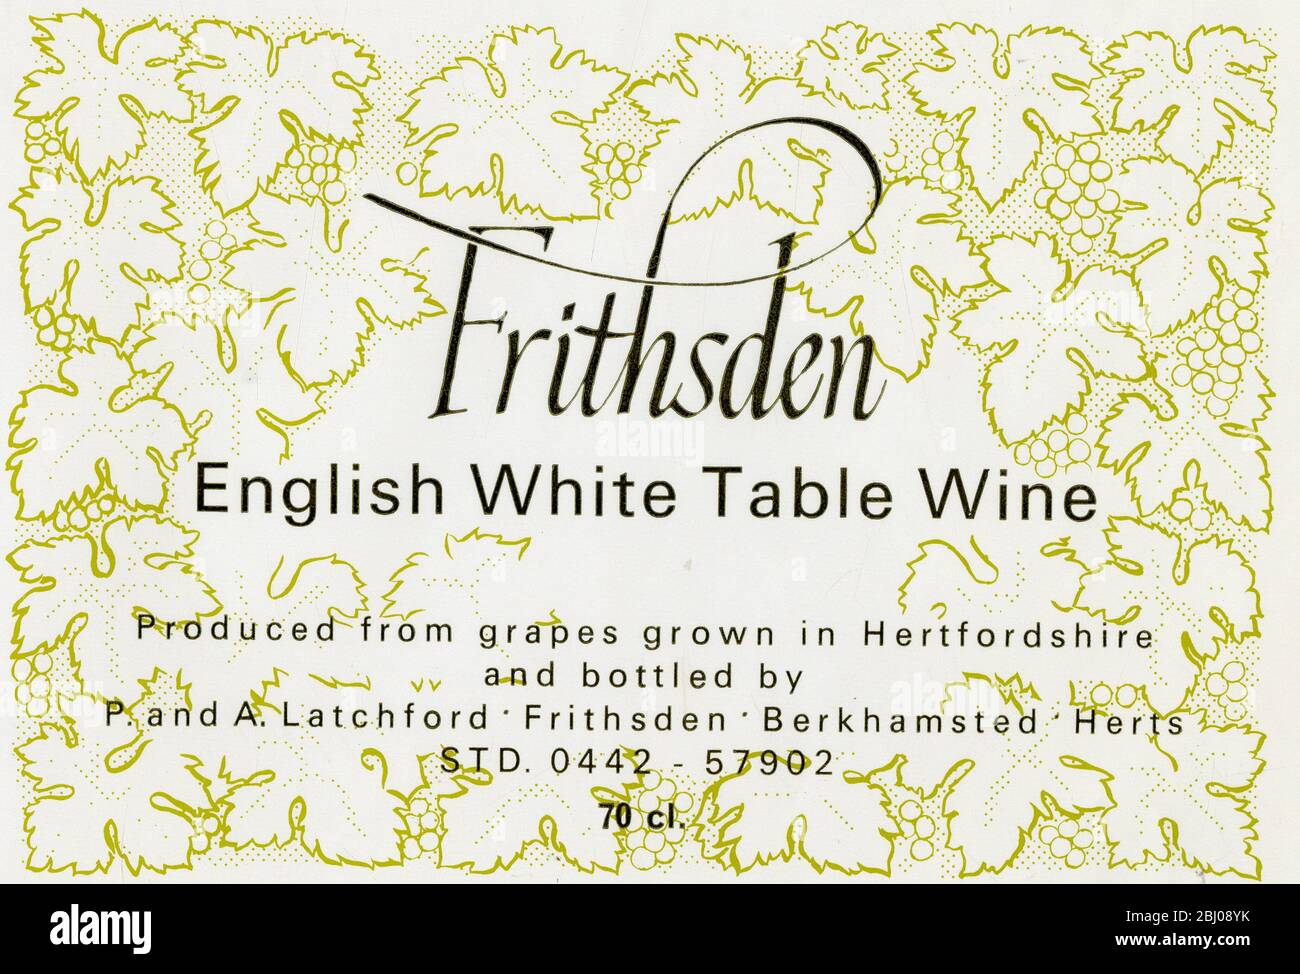 Wine label - Frithsden English White Table Wine. Produced in Hertfordshire and bottled by P & A Latchford in Frithsden, Berkhamsted, Hertfordshire. - 1977 Stock Photo